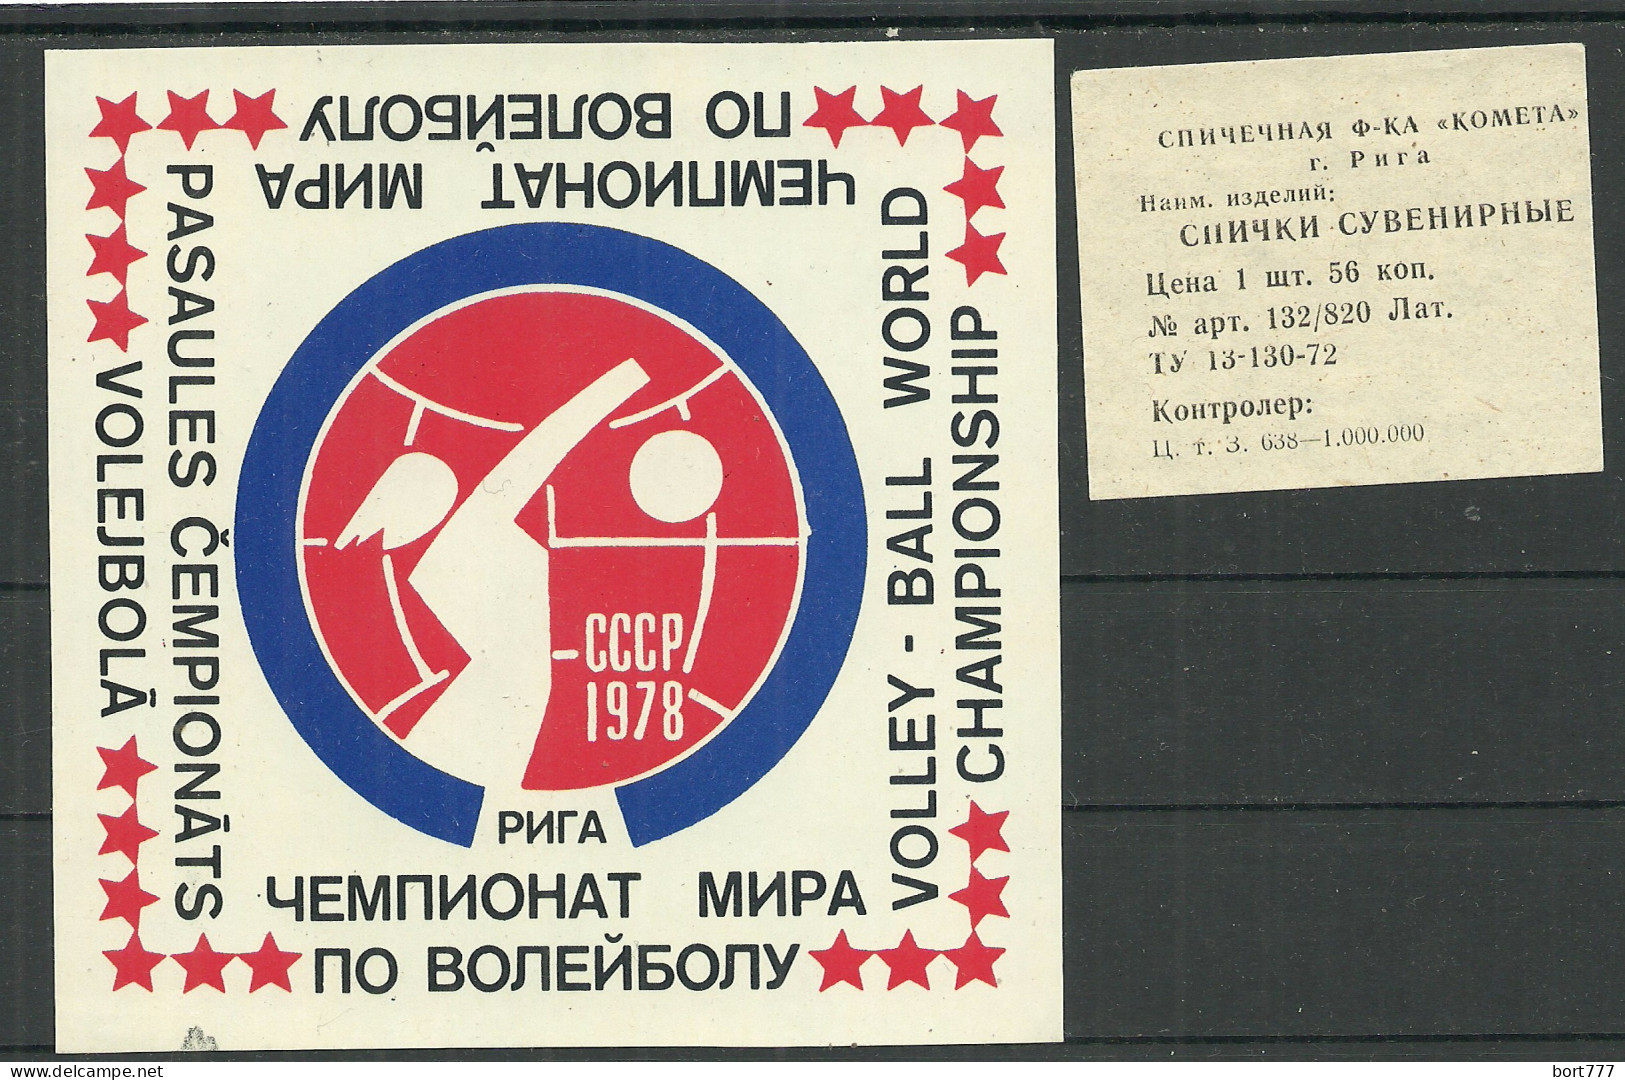 RUSSIA Latvia 1978 Special Matchbox Label 93x93 Mm / Volleyball / (catalog # 398) - Matchbox Labels